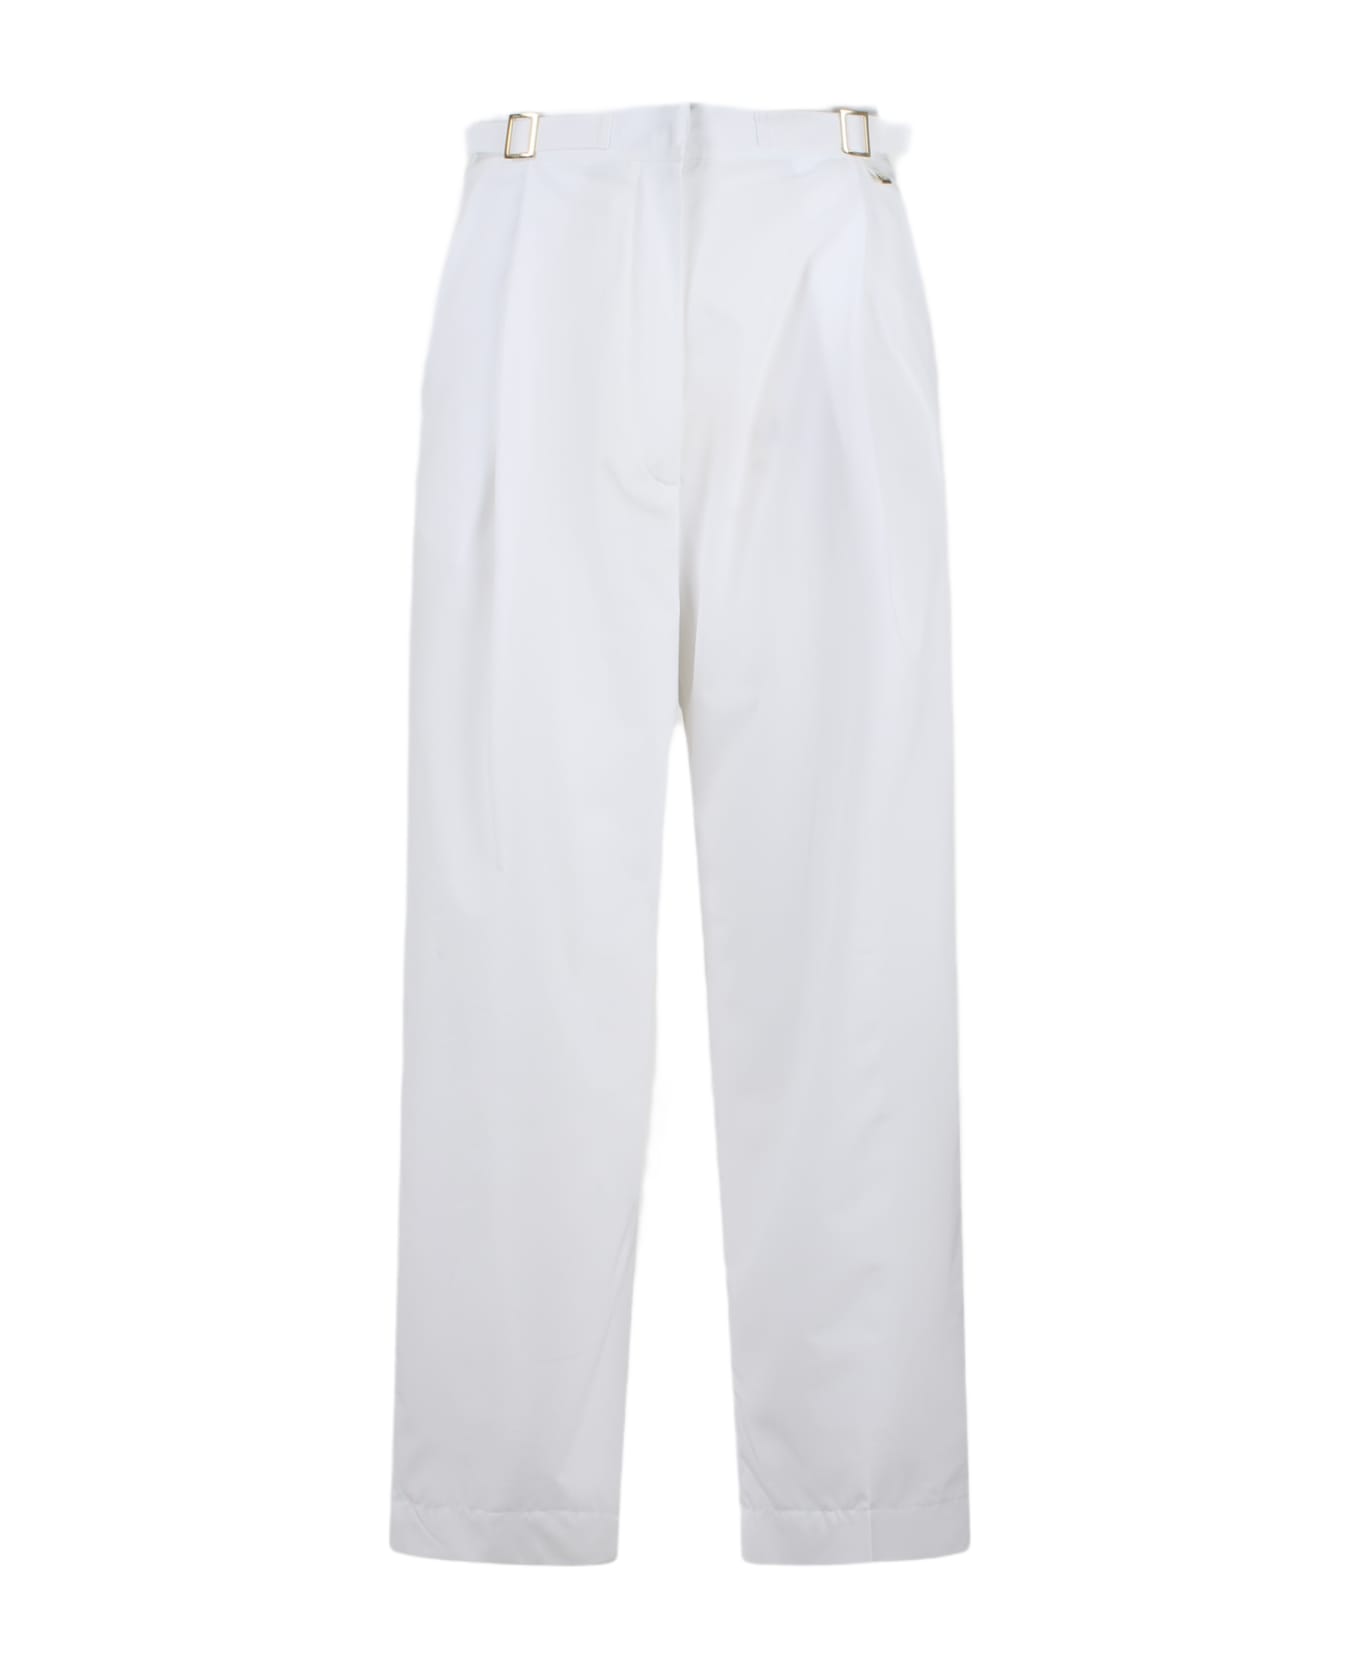 Herno Structures Nylon Trousers - White